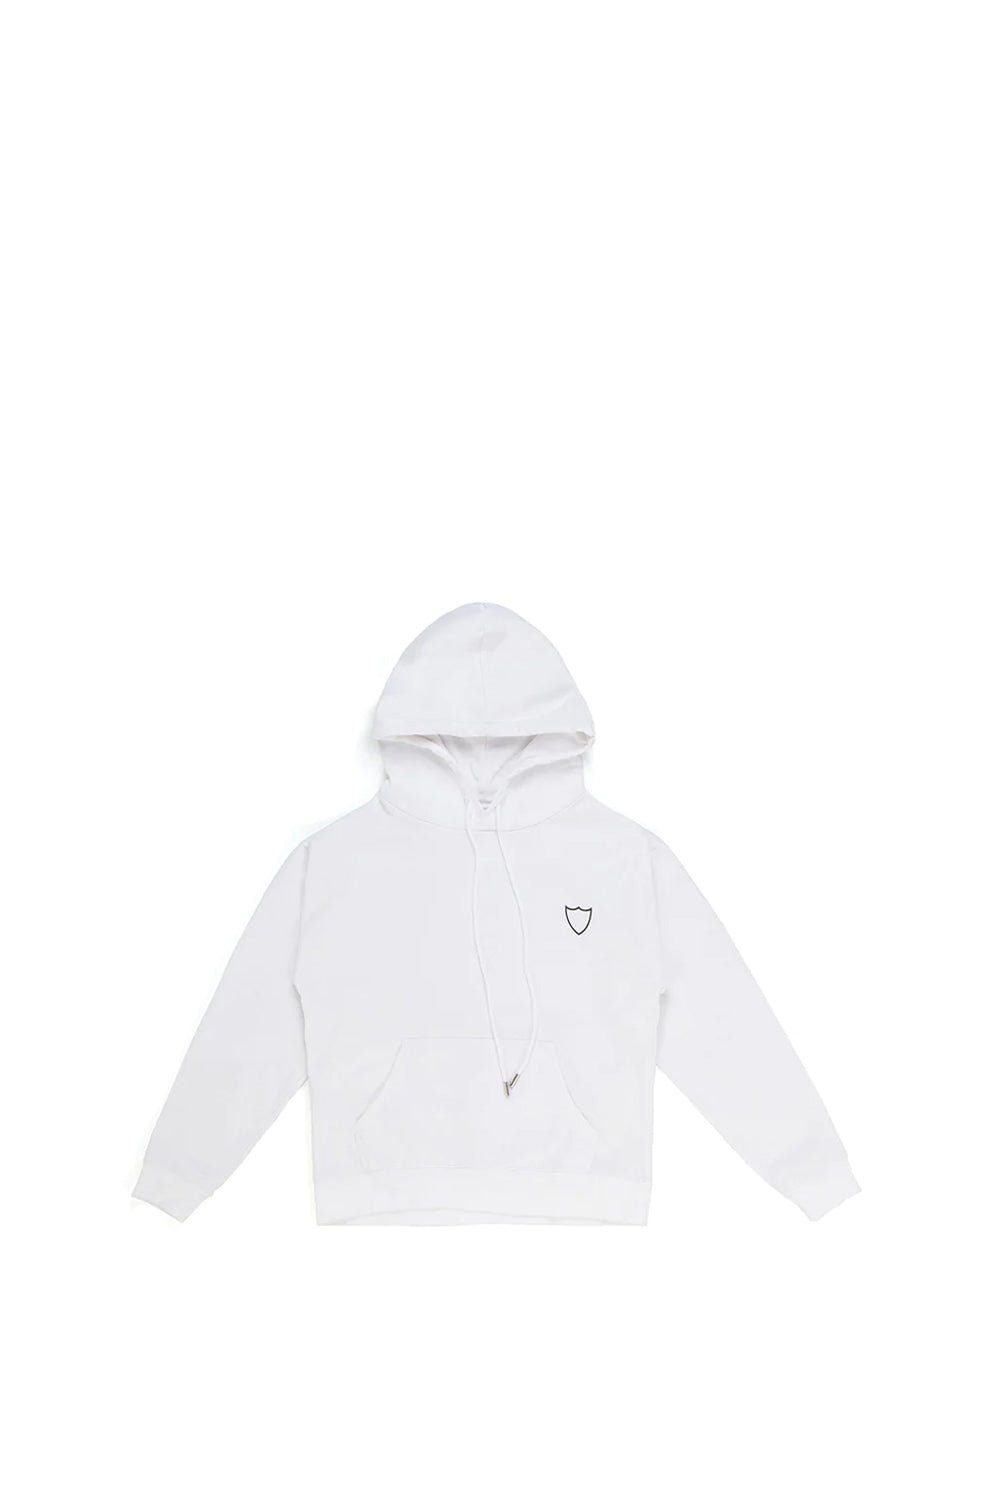 LIL LOGO HOODIE Regular fit hoodie. Hood with drawstring, ribbed cuffs and hem. One front kangaroo pocket. Composition: 100% Cotton HTC LOS ANGELES